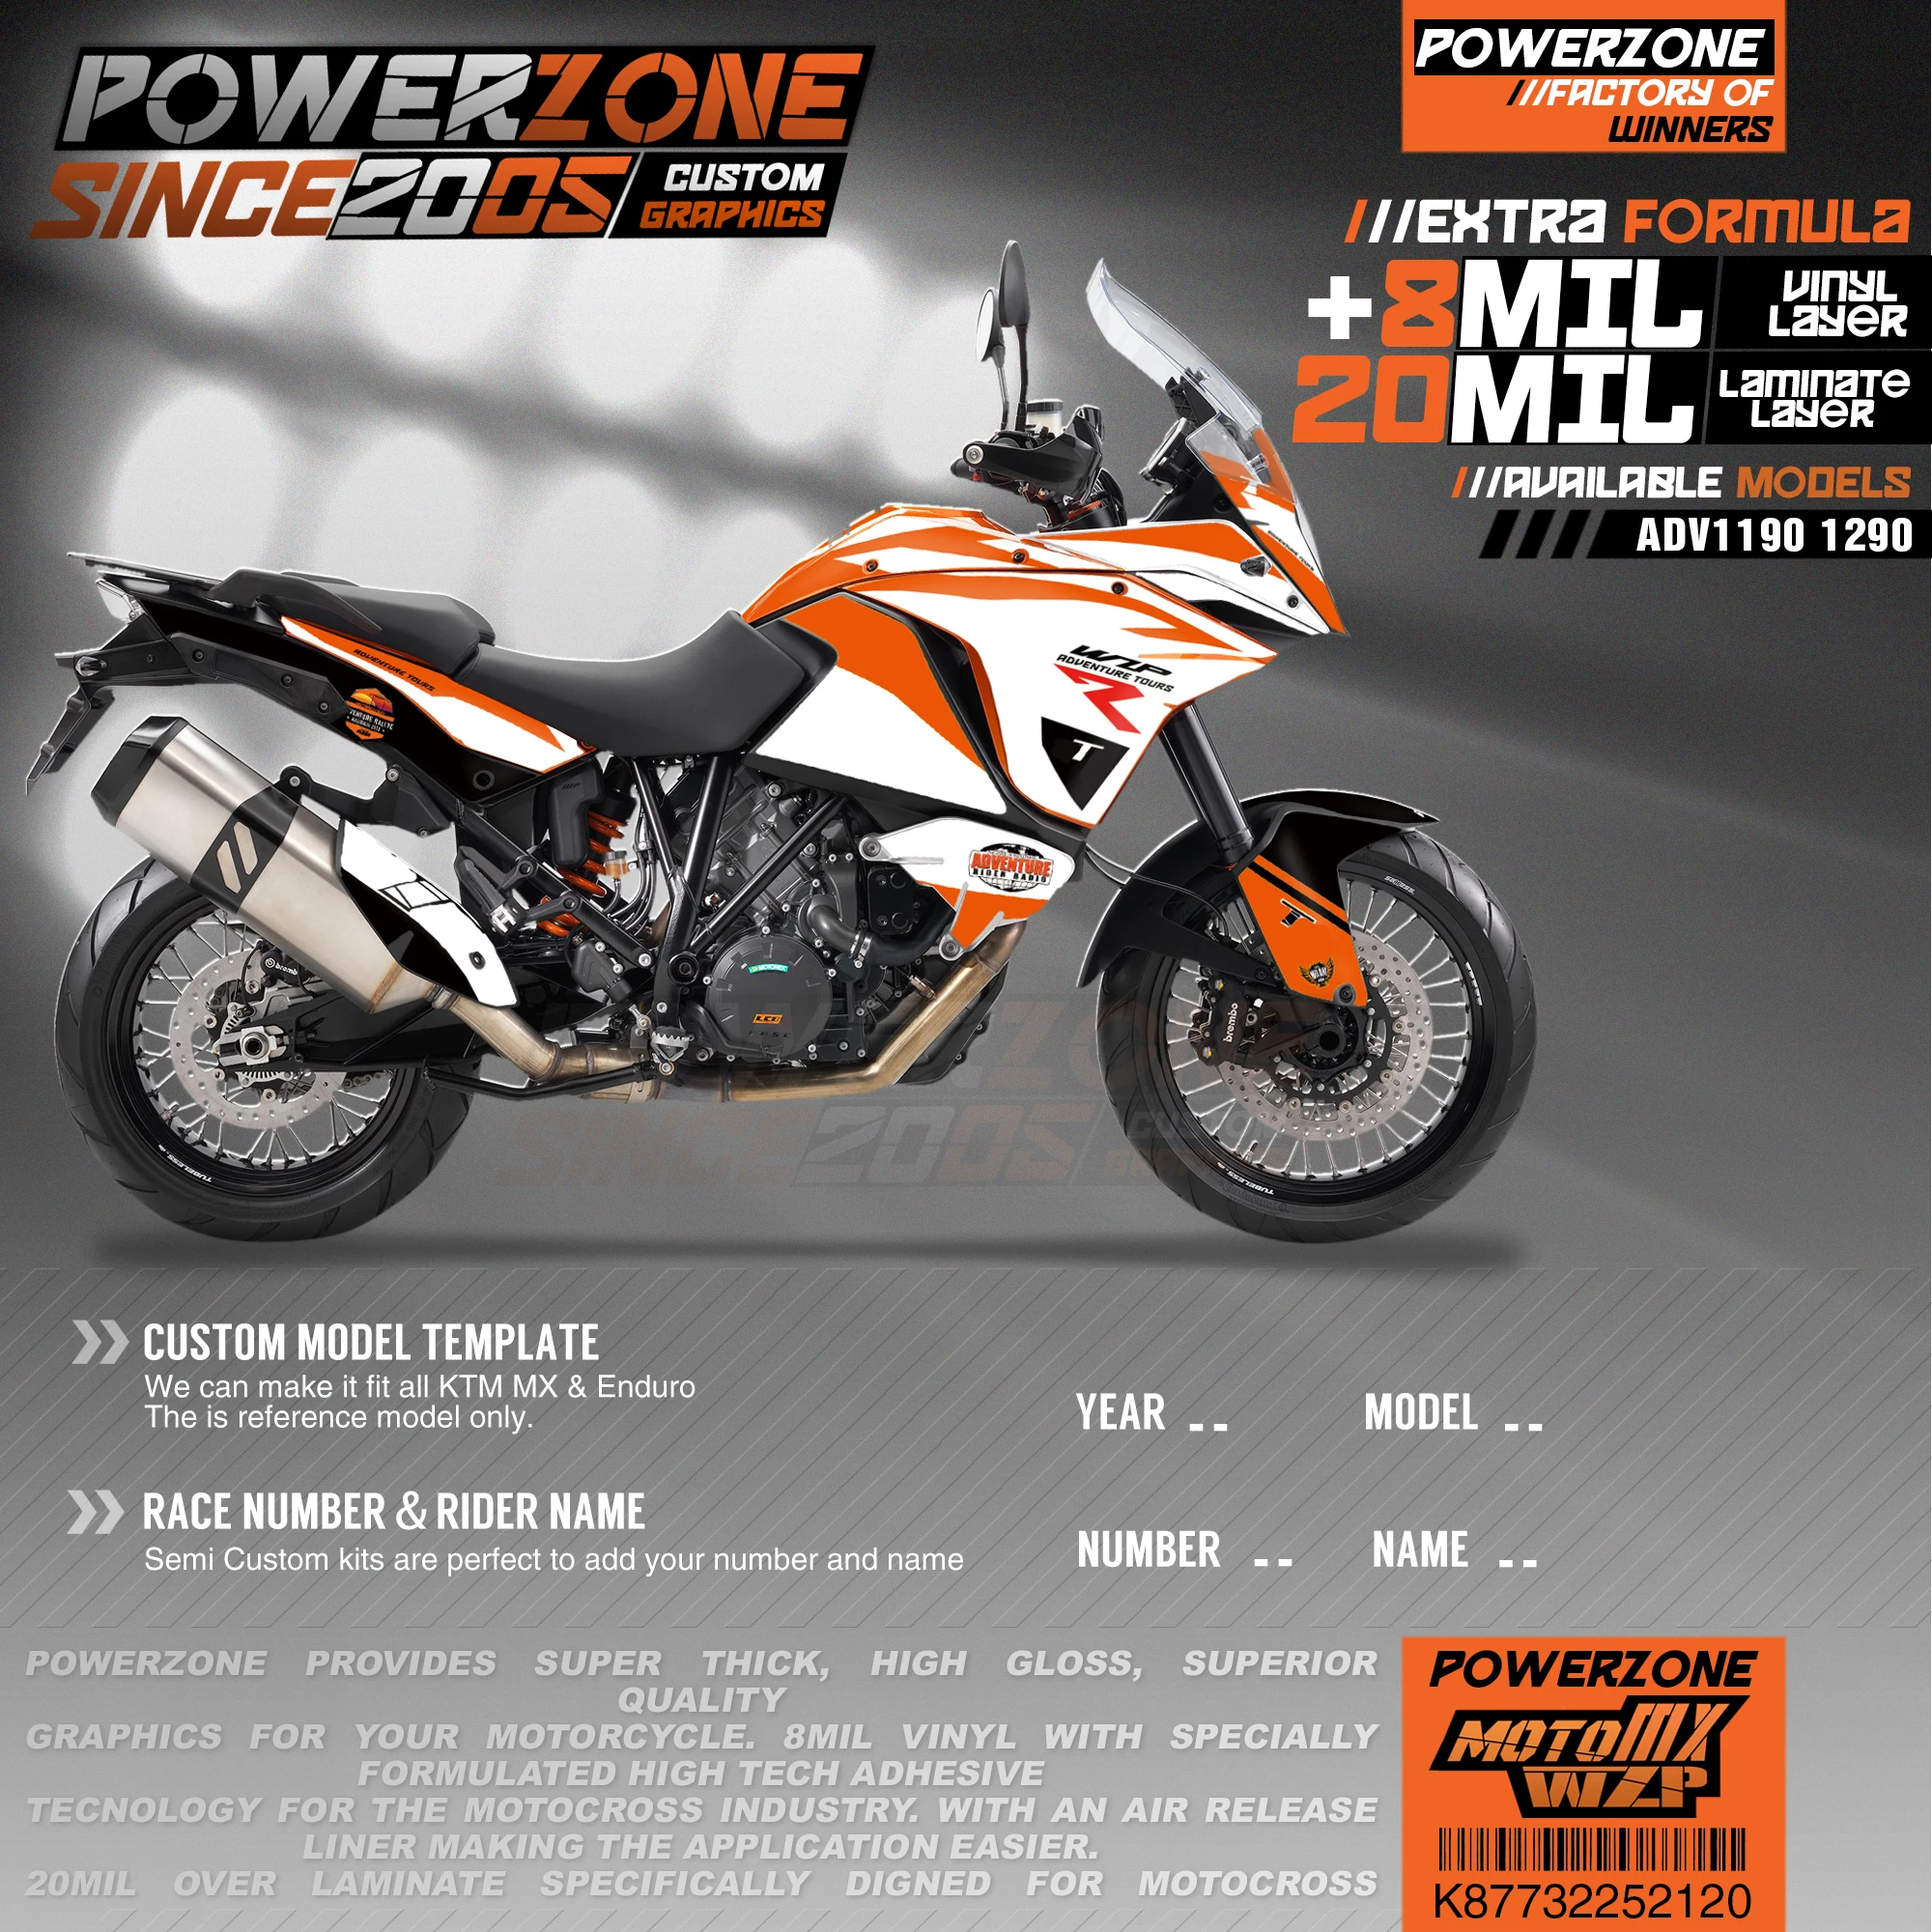 

PowerZone Custom Team Graphics Backgrounds Decals 3M Stickers Kit For KTM ADV 1050 1090 1190 1290 120